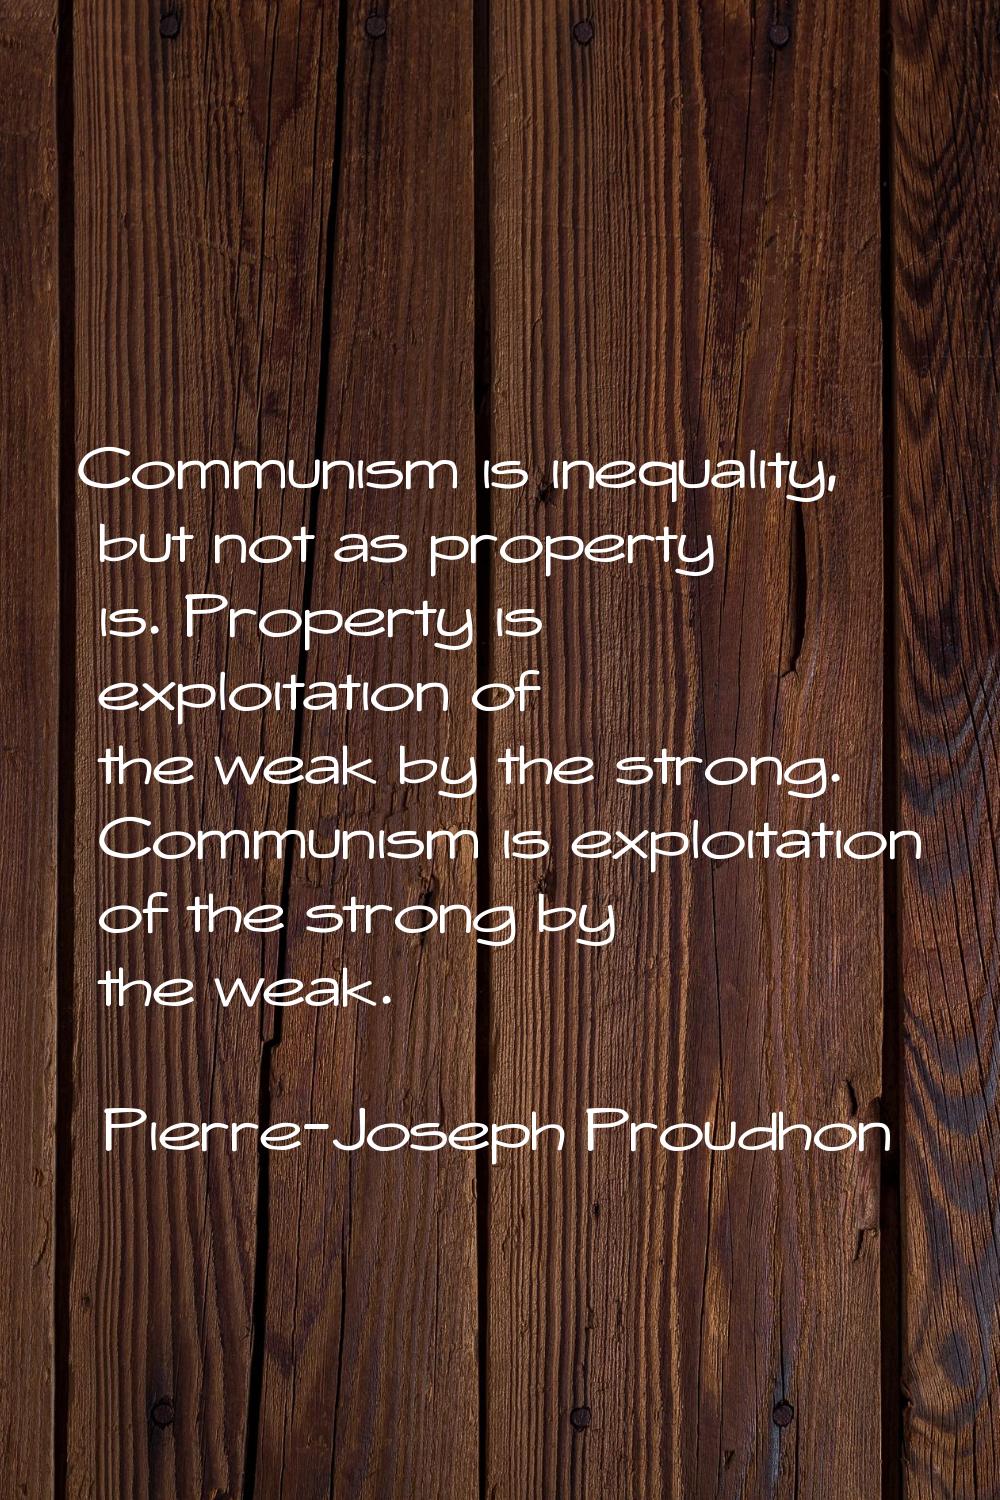 Communism is inequality, but not as property is. Property is exploitation of the weak by the strong